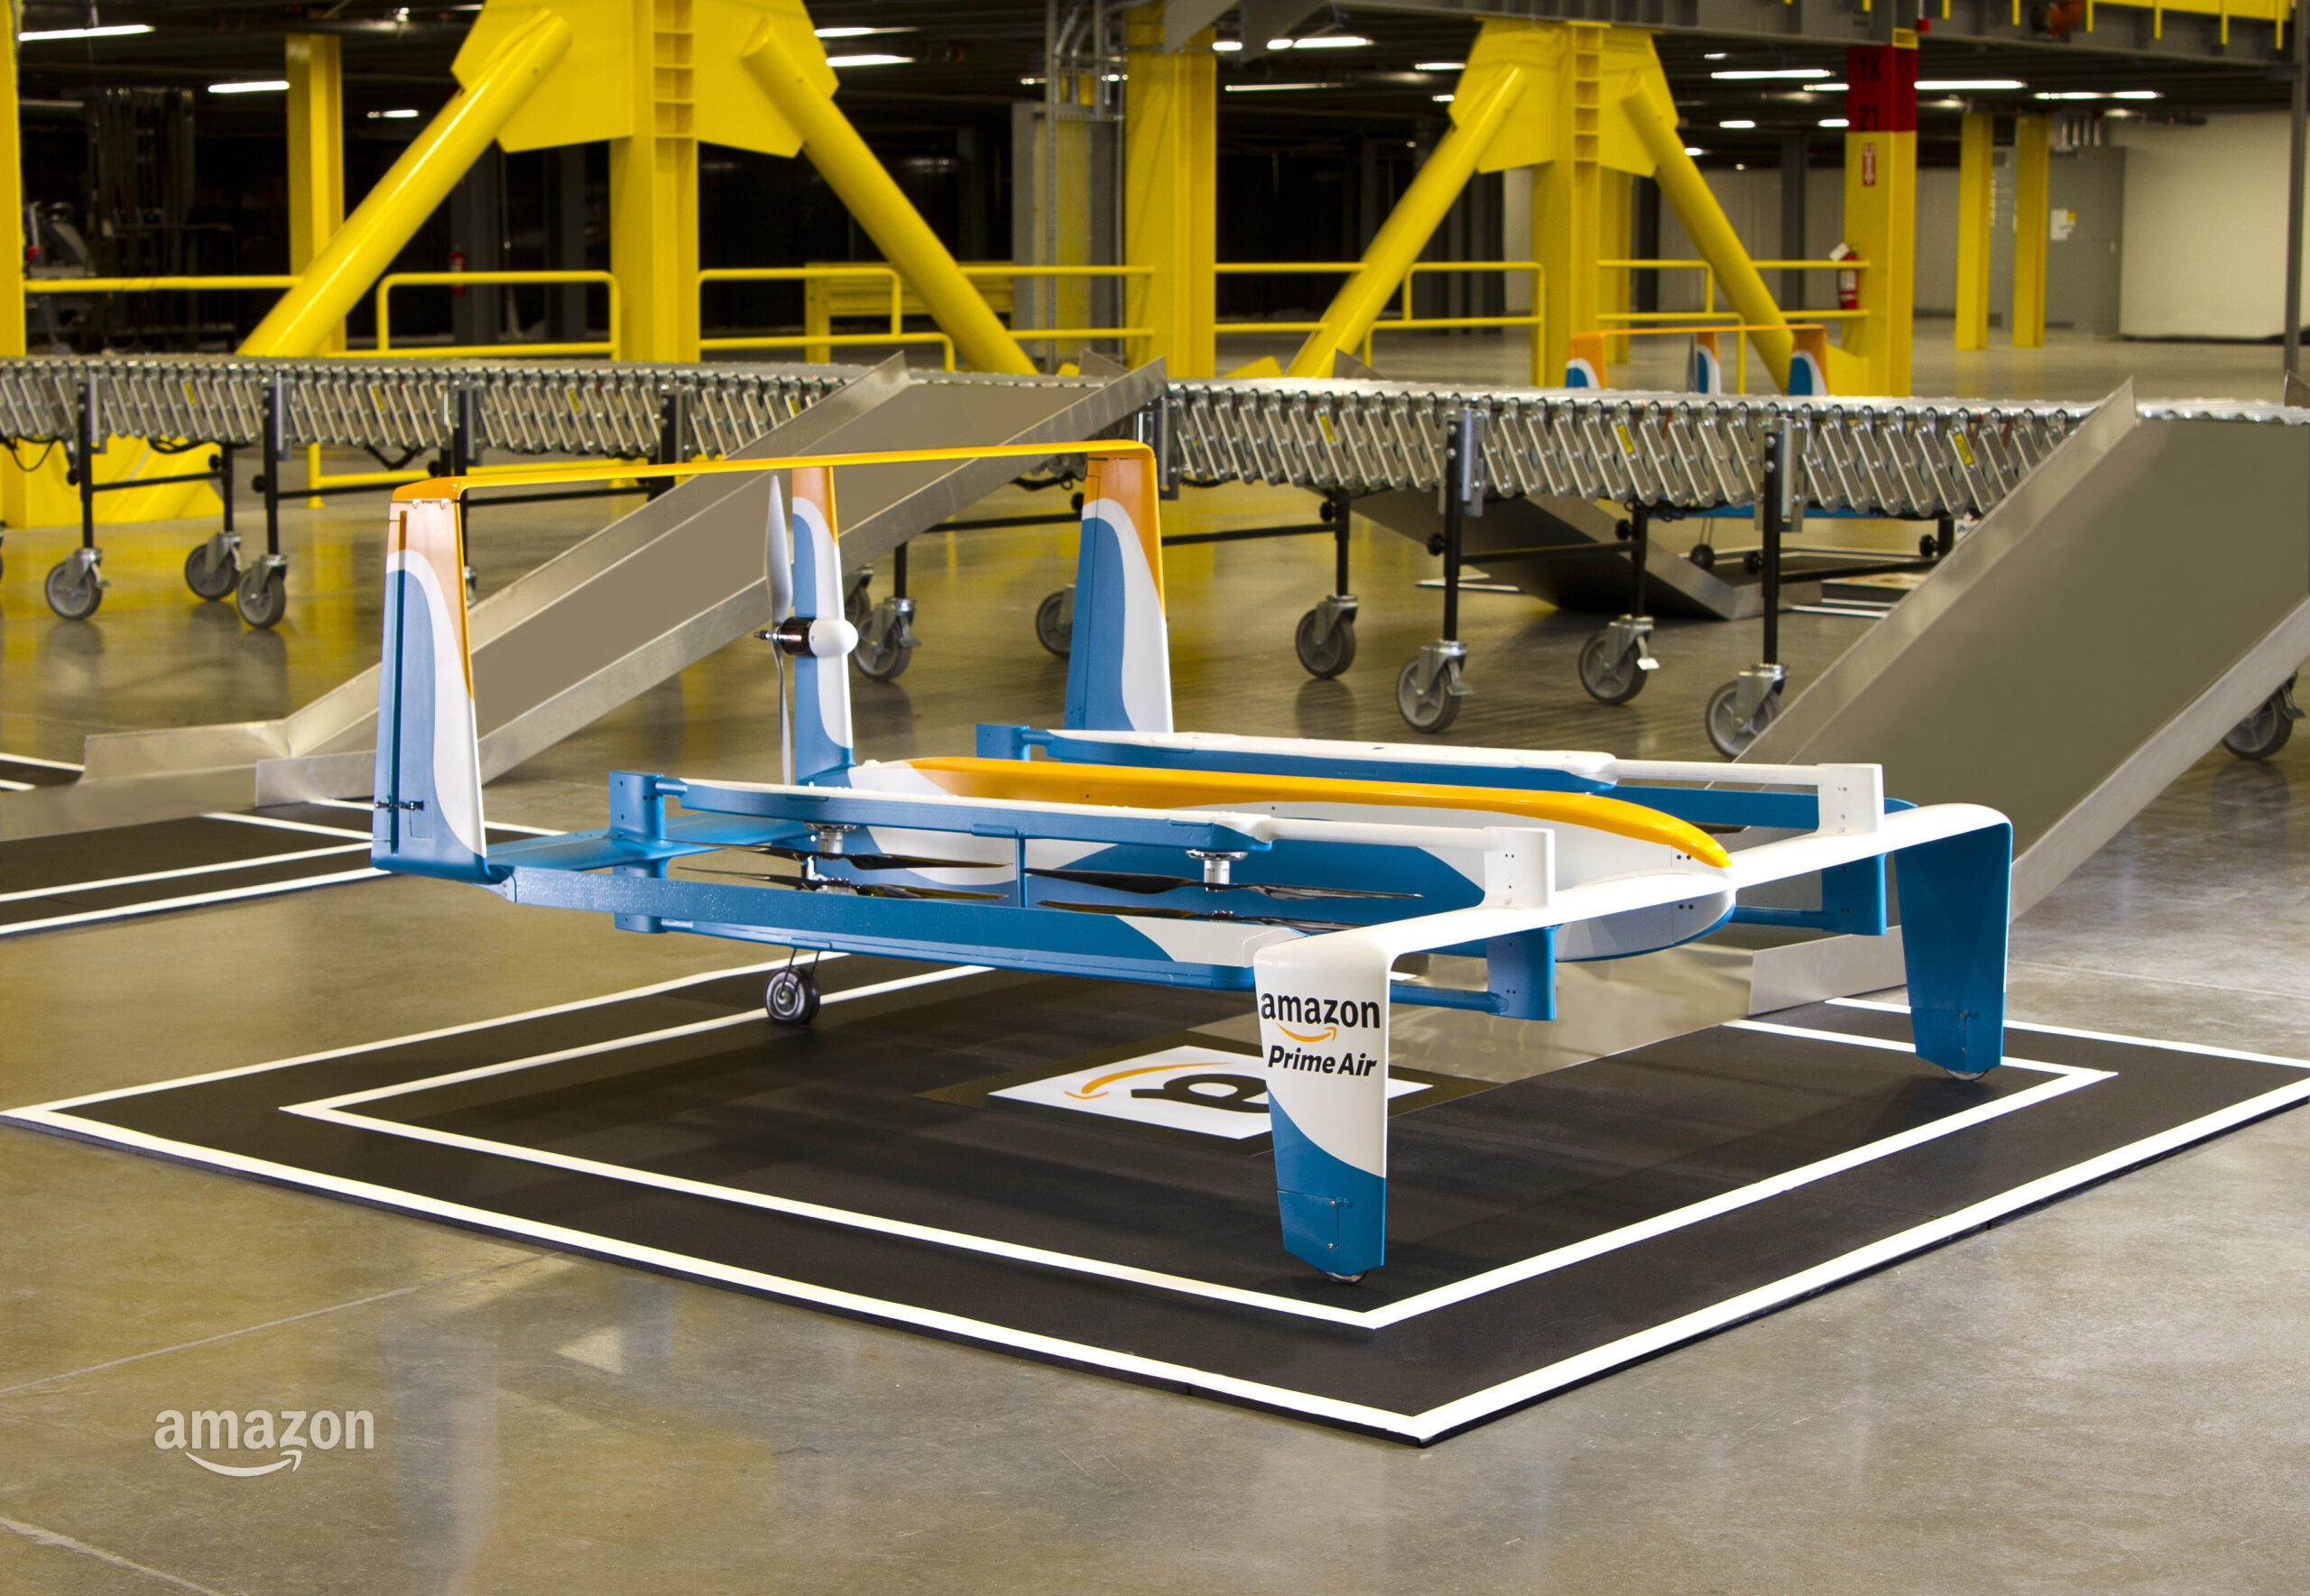 Amazon Shows Off New Delivery Drones With ‘Top Gear’s’ Clarkson